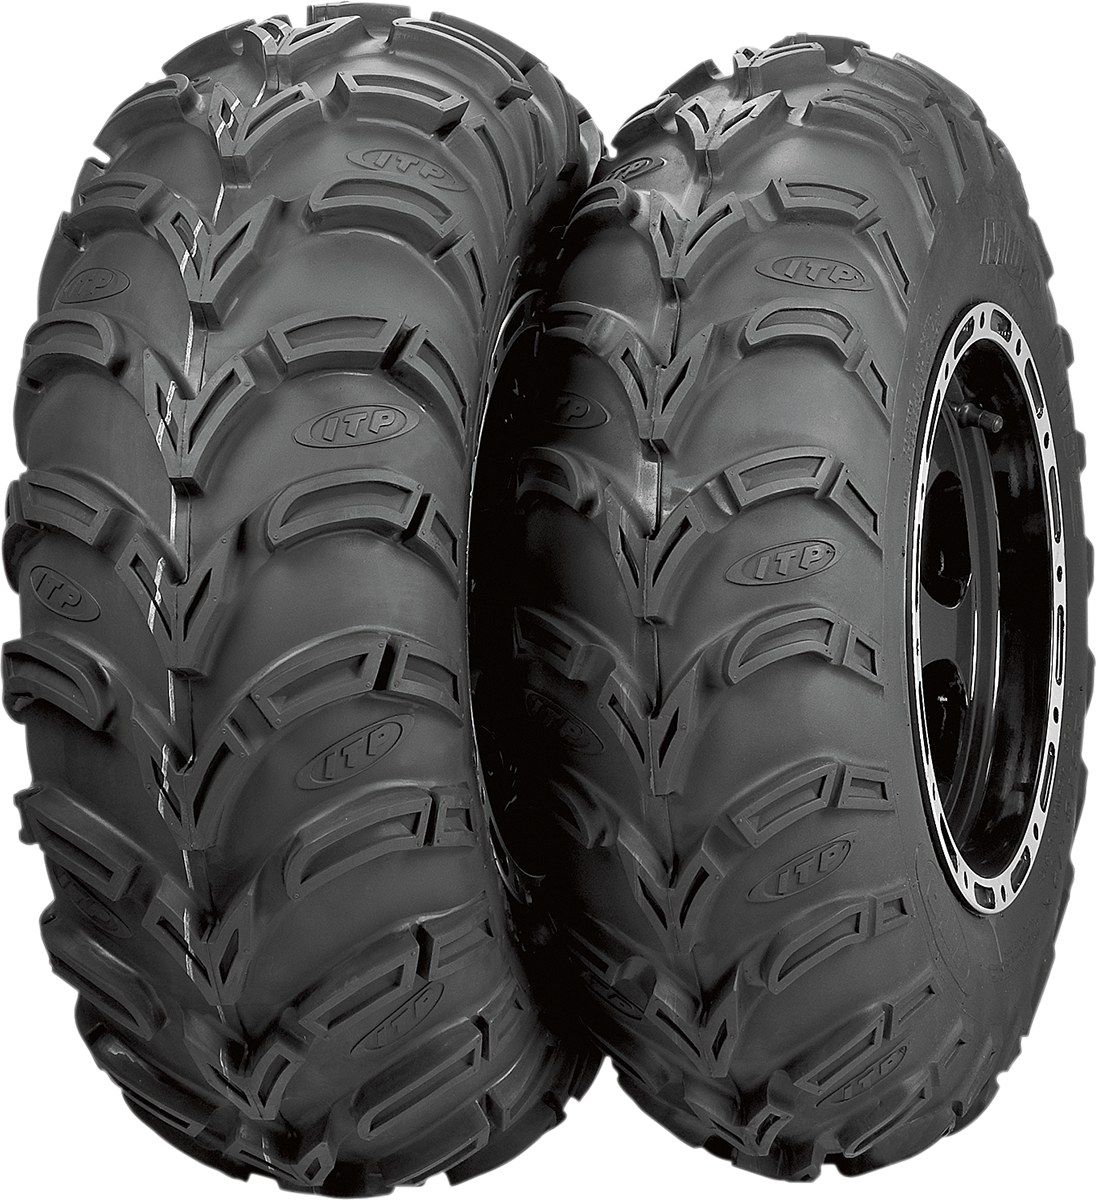 ITP Tire - Mud Lite AT - Front/Rear - 24x11-10 - 6 Ply 56A305